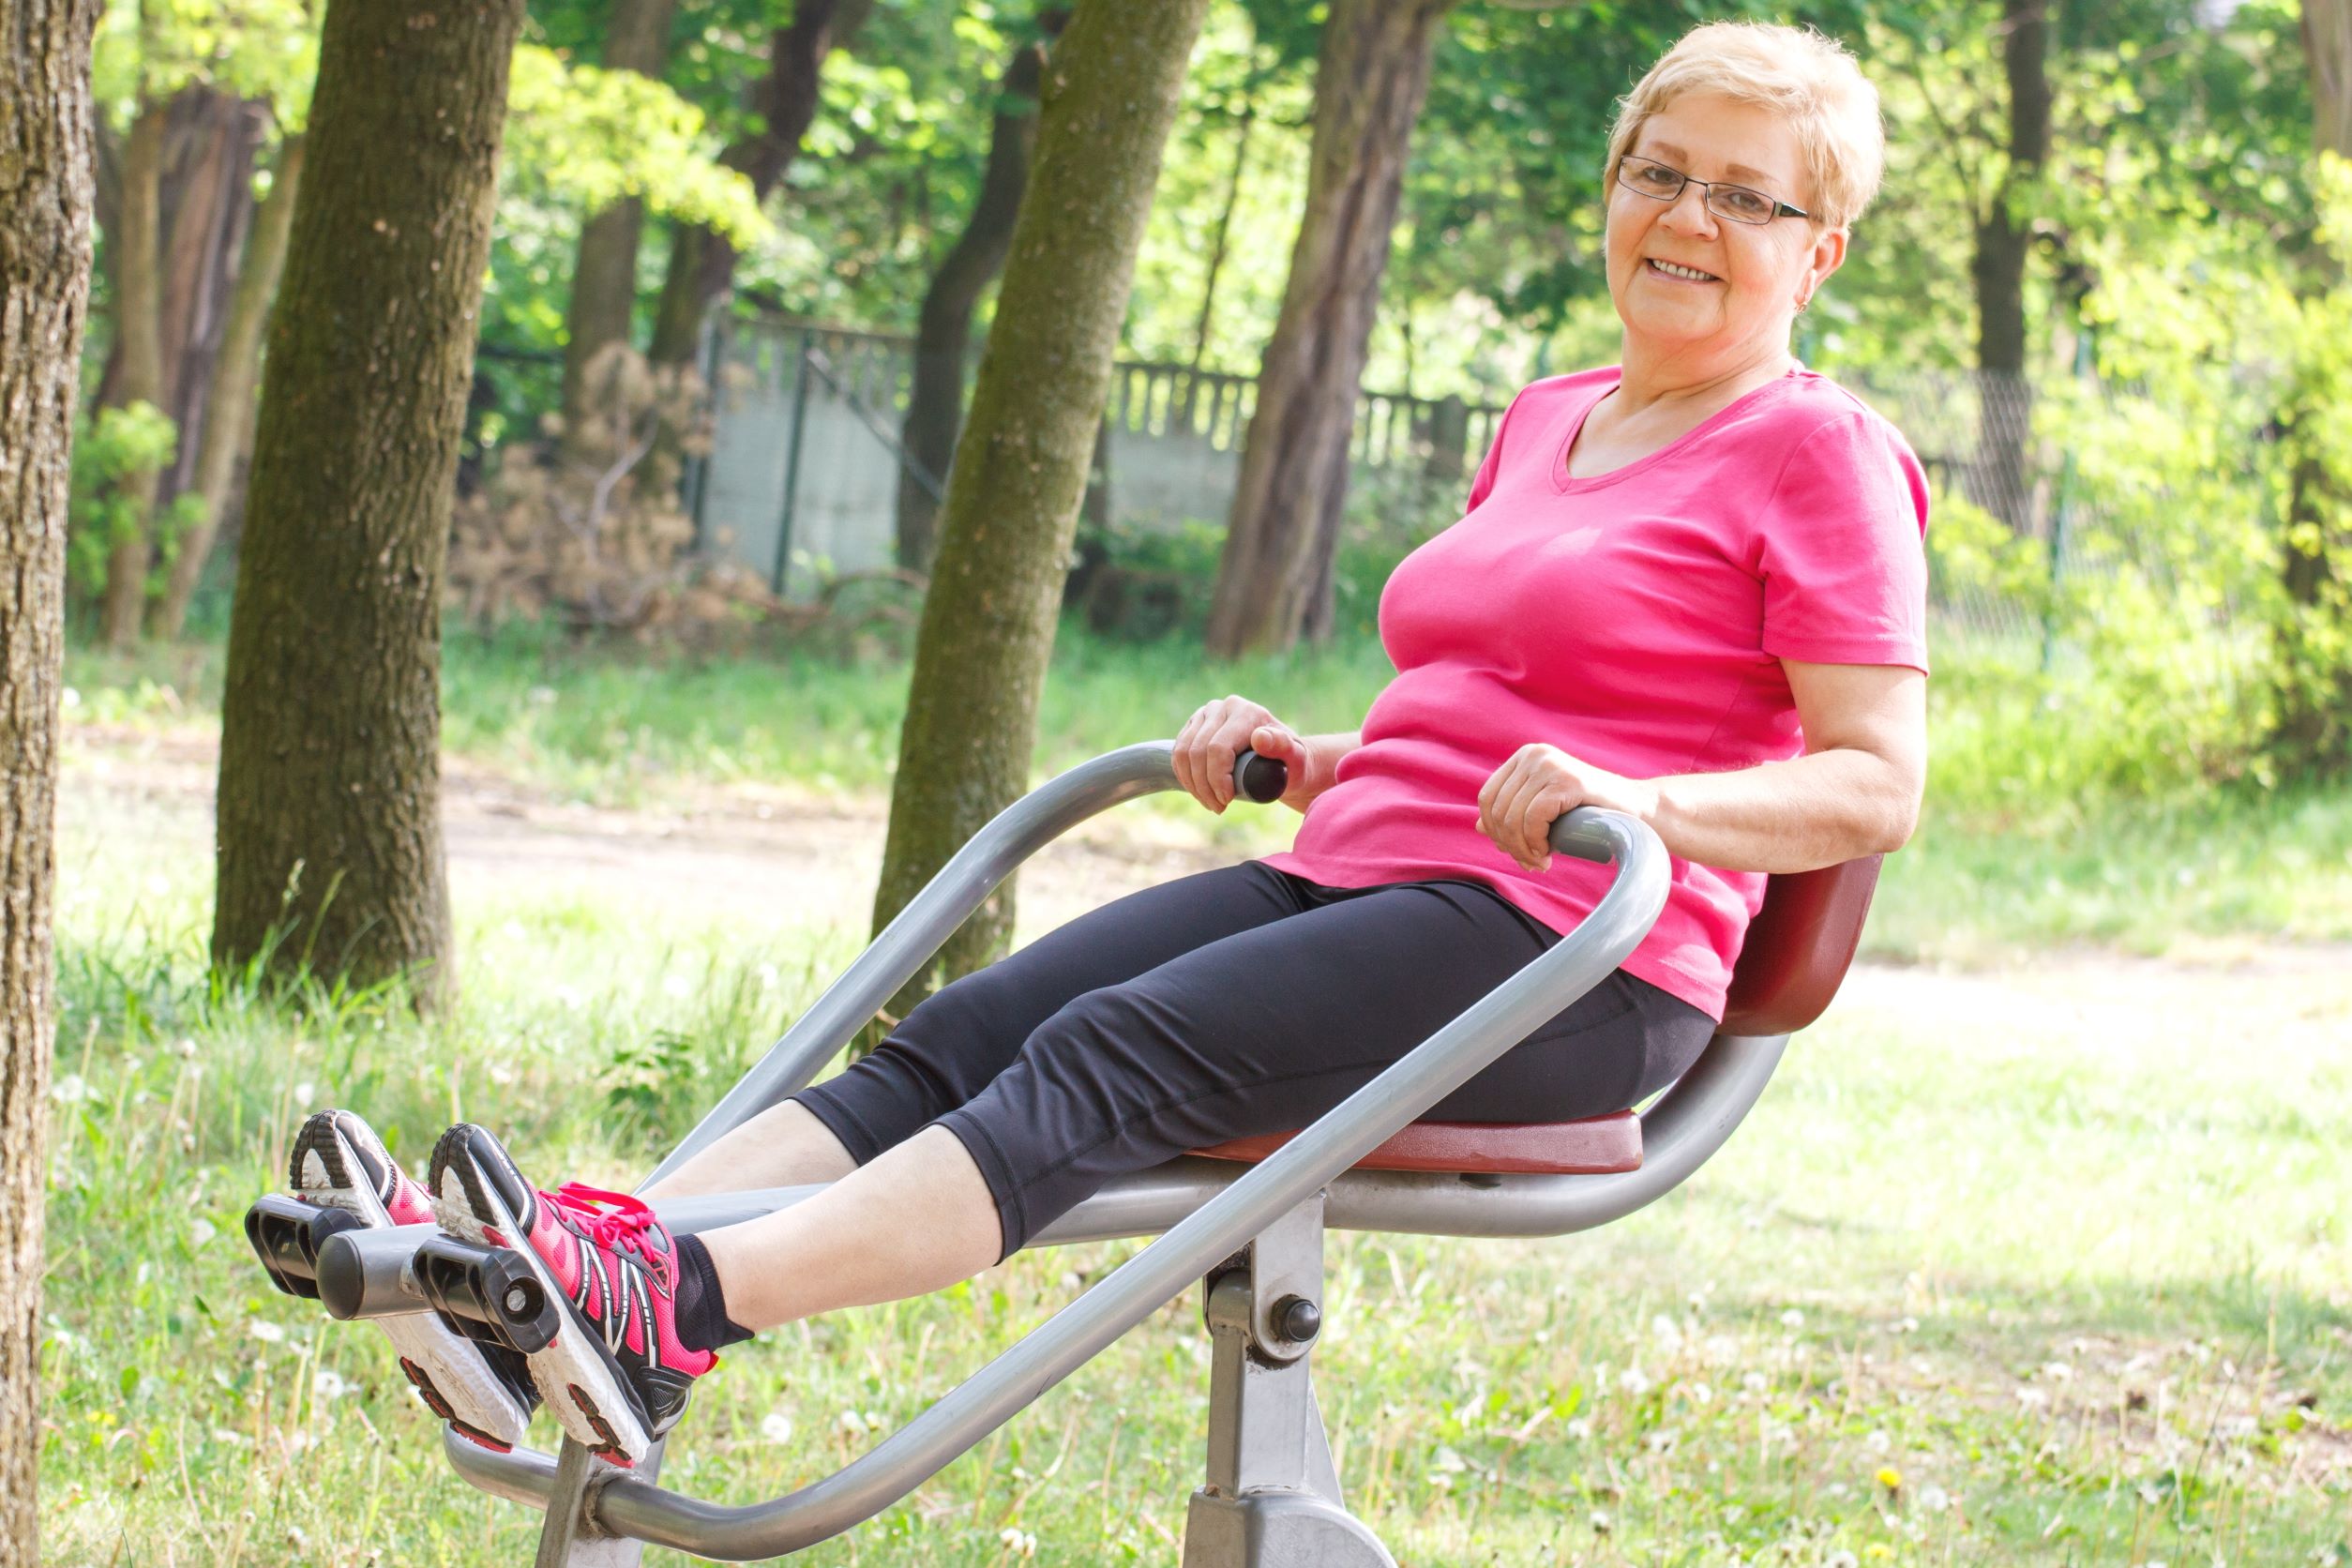 Person takes a break while using outdoor exercise equipment